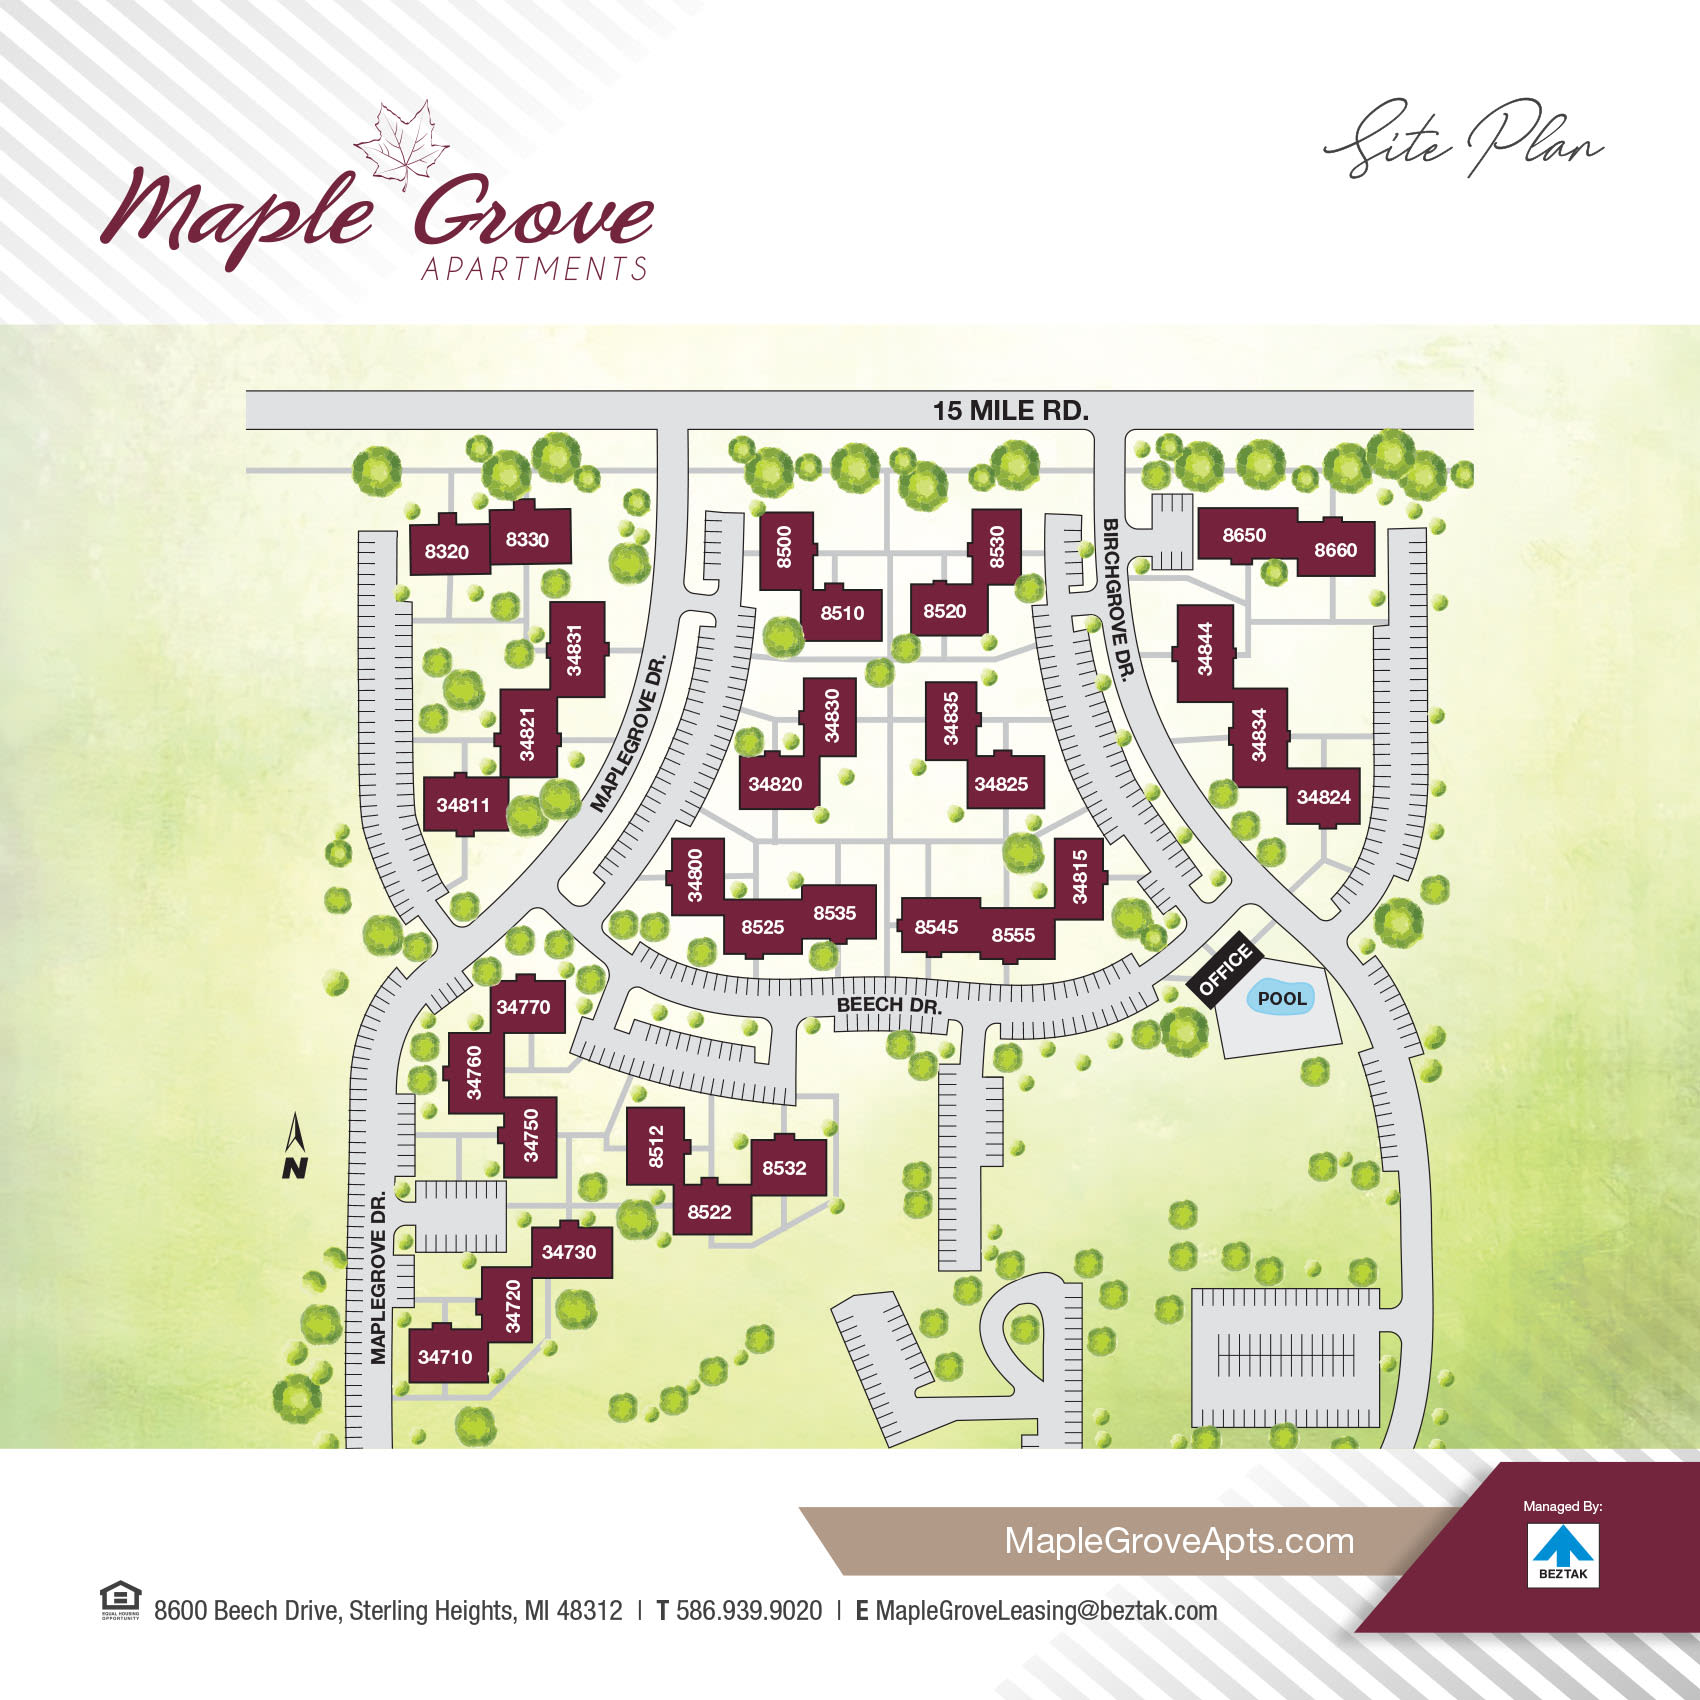 Site map of Maple Grove Apartments in Sterling Heights, Michigan